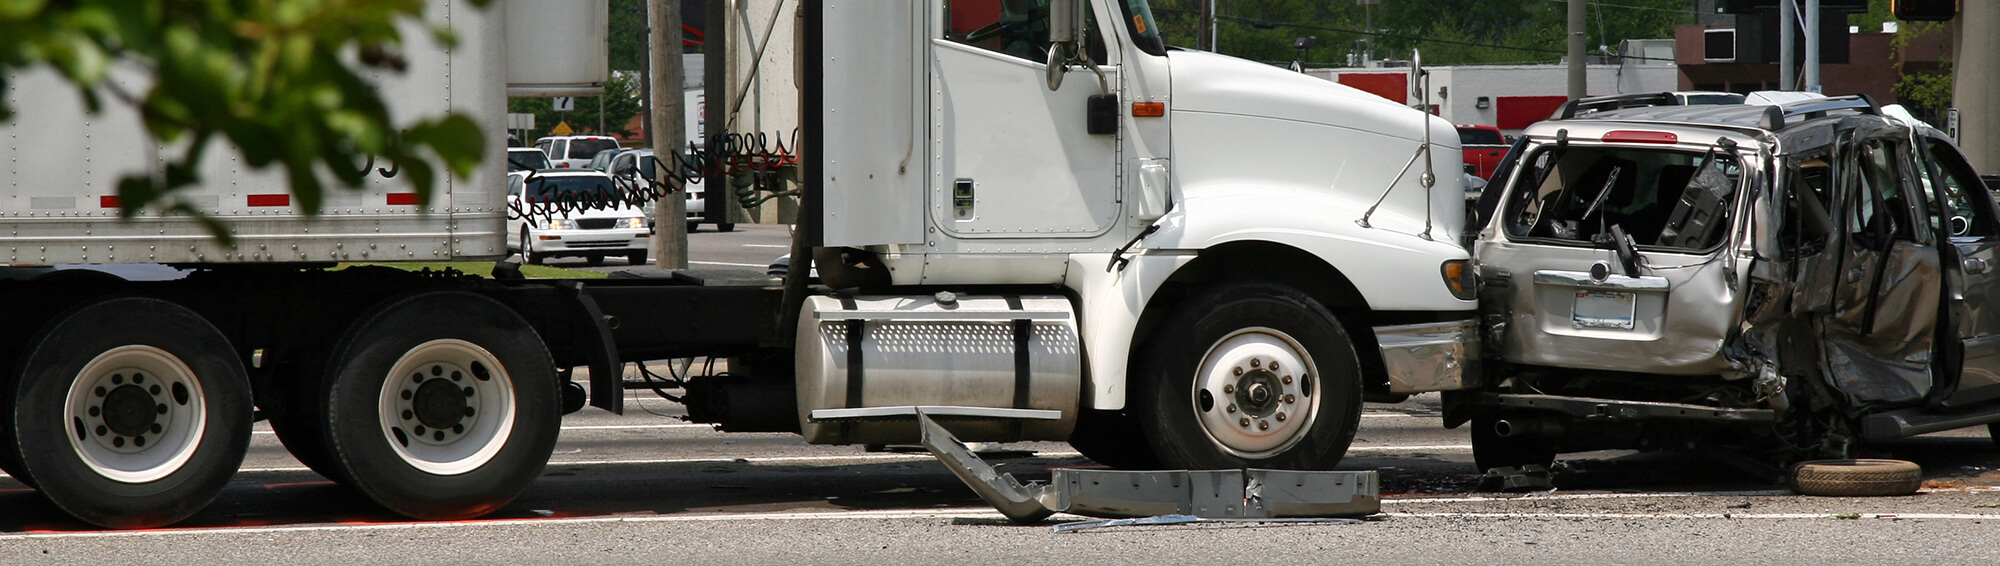 The Number of Truck Accidents in the U.S. Is Rising